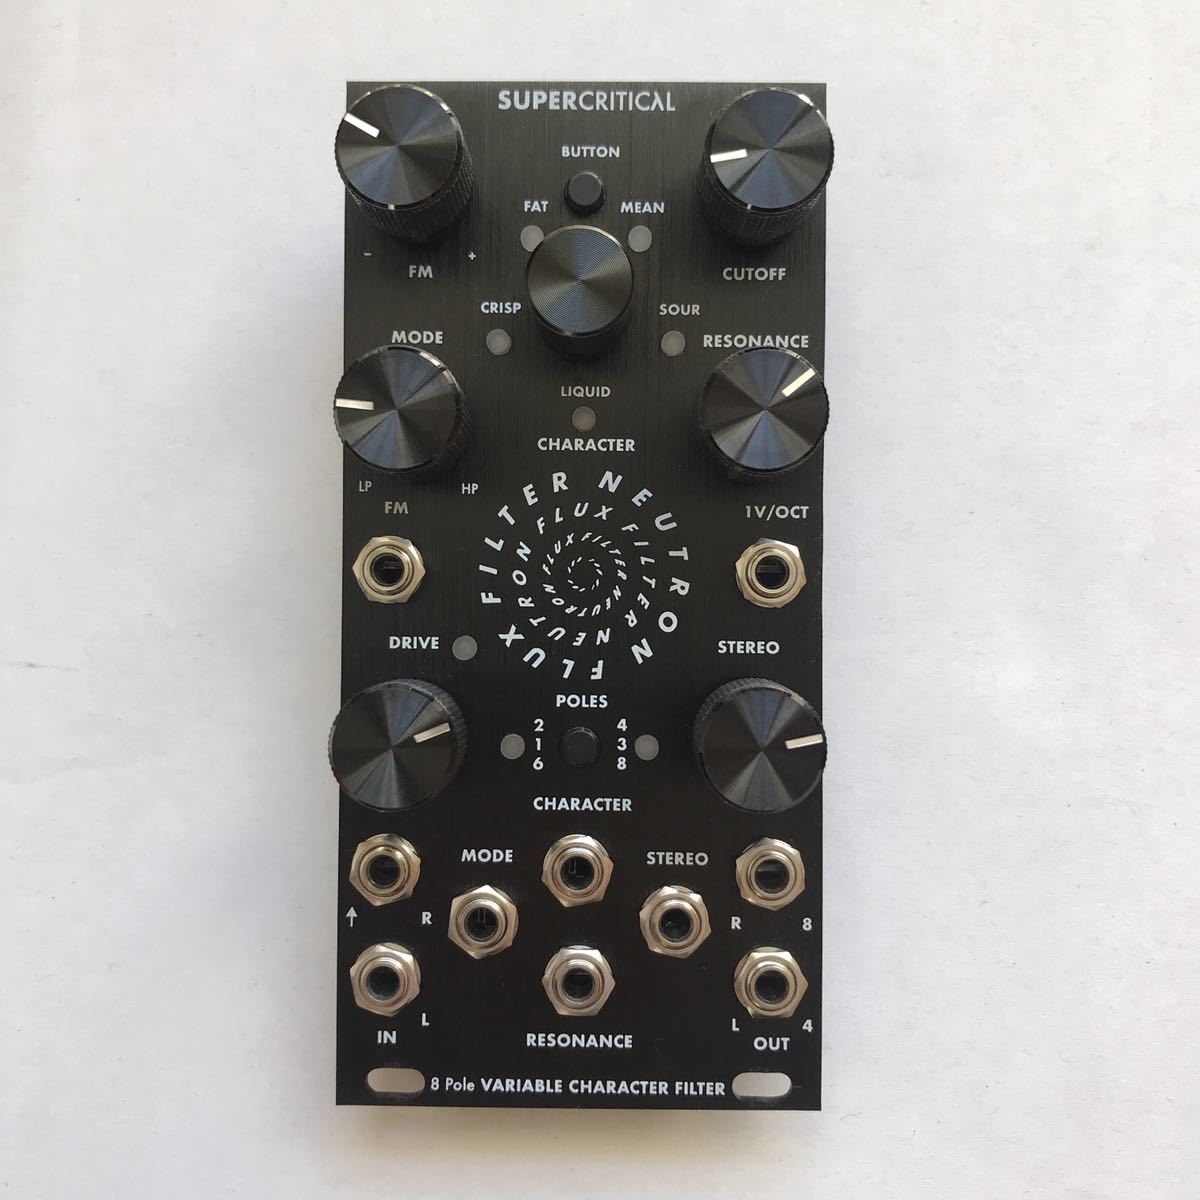 Erica STEREO Stereo Erica BLACK Synths Mixer Black BBD モジュラーシンセ　ユーロラック  Synths